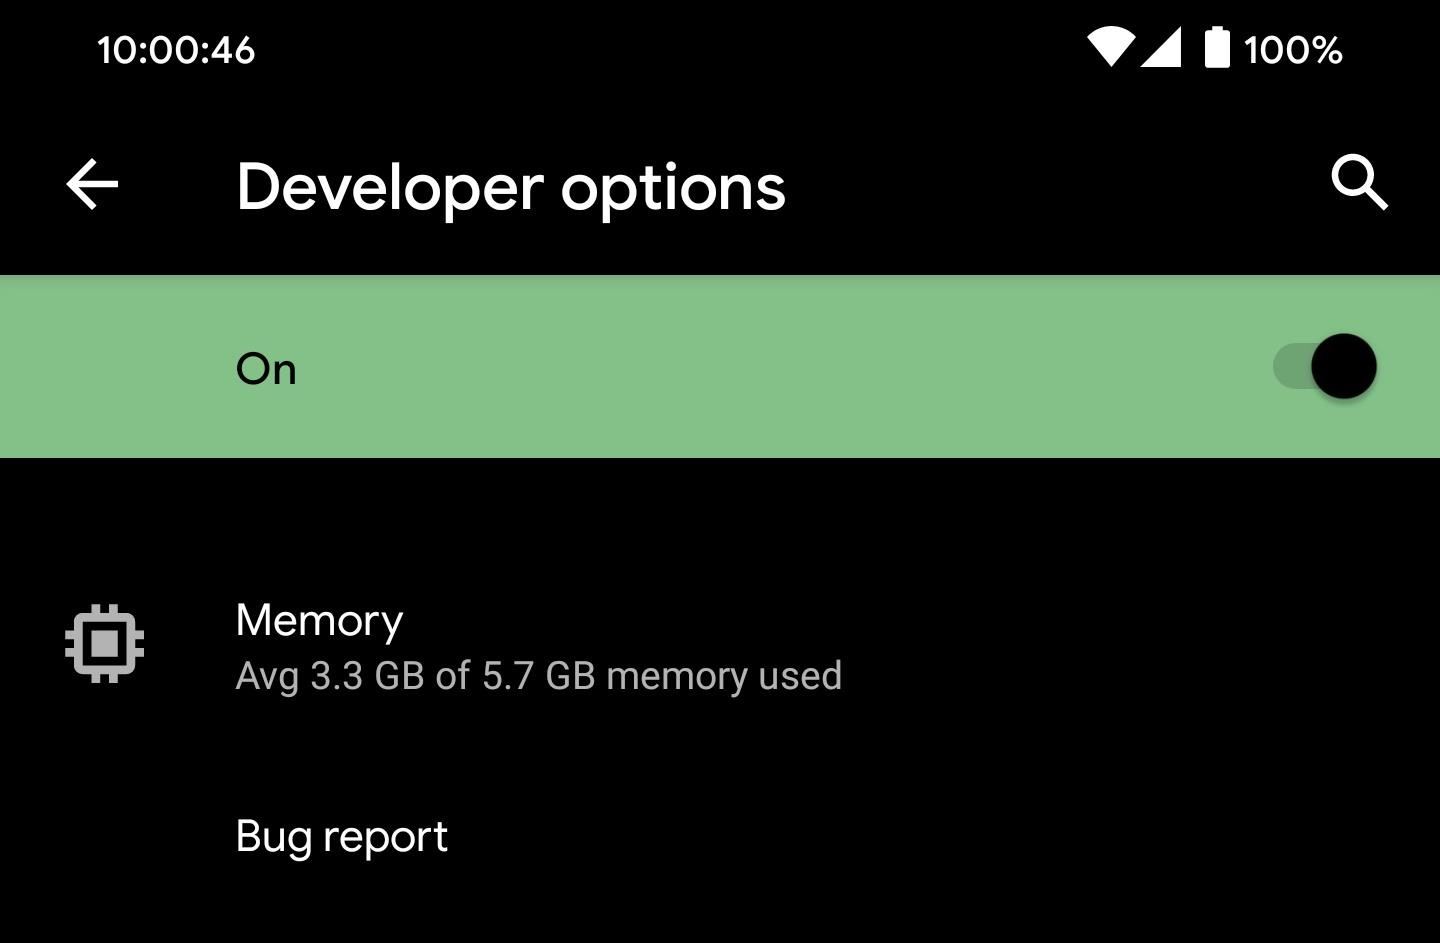 Phone Running Slow? Use Android's Built-in RAM Manager to Free Up Memory